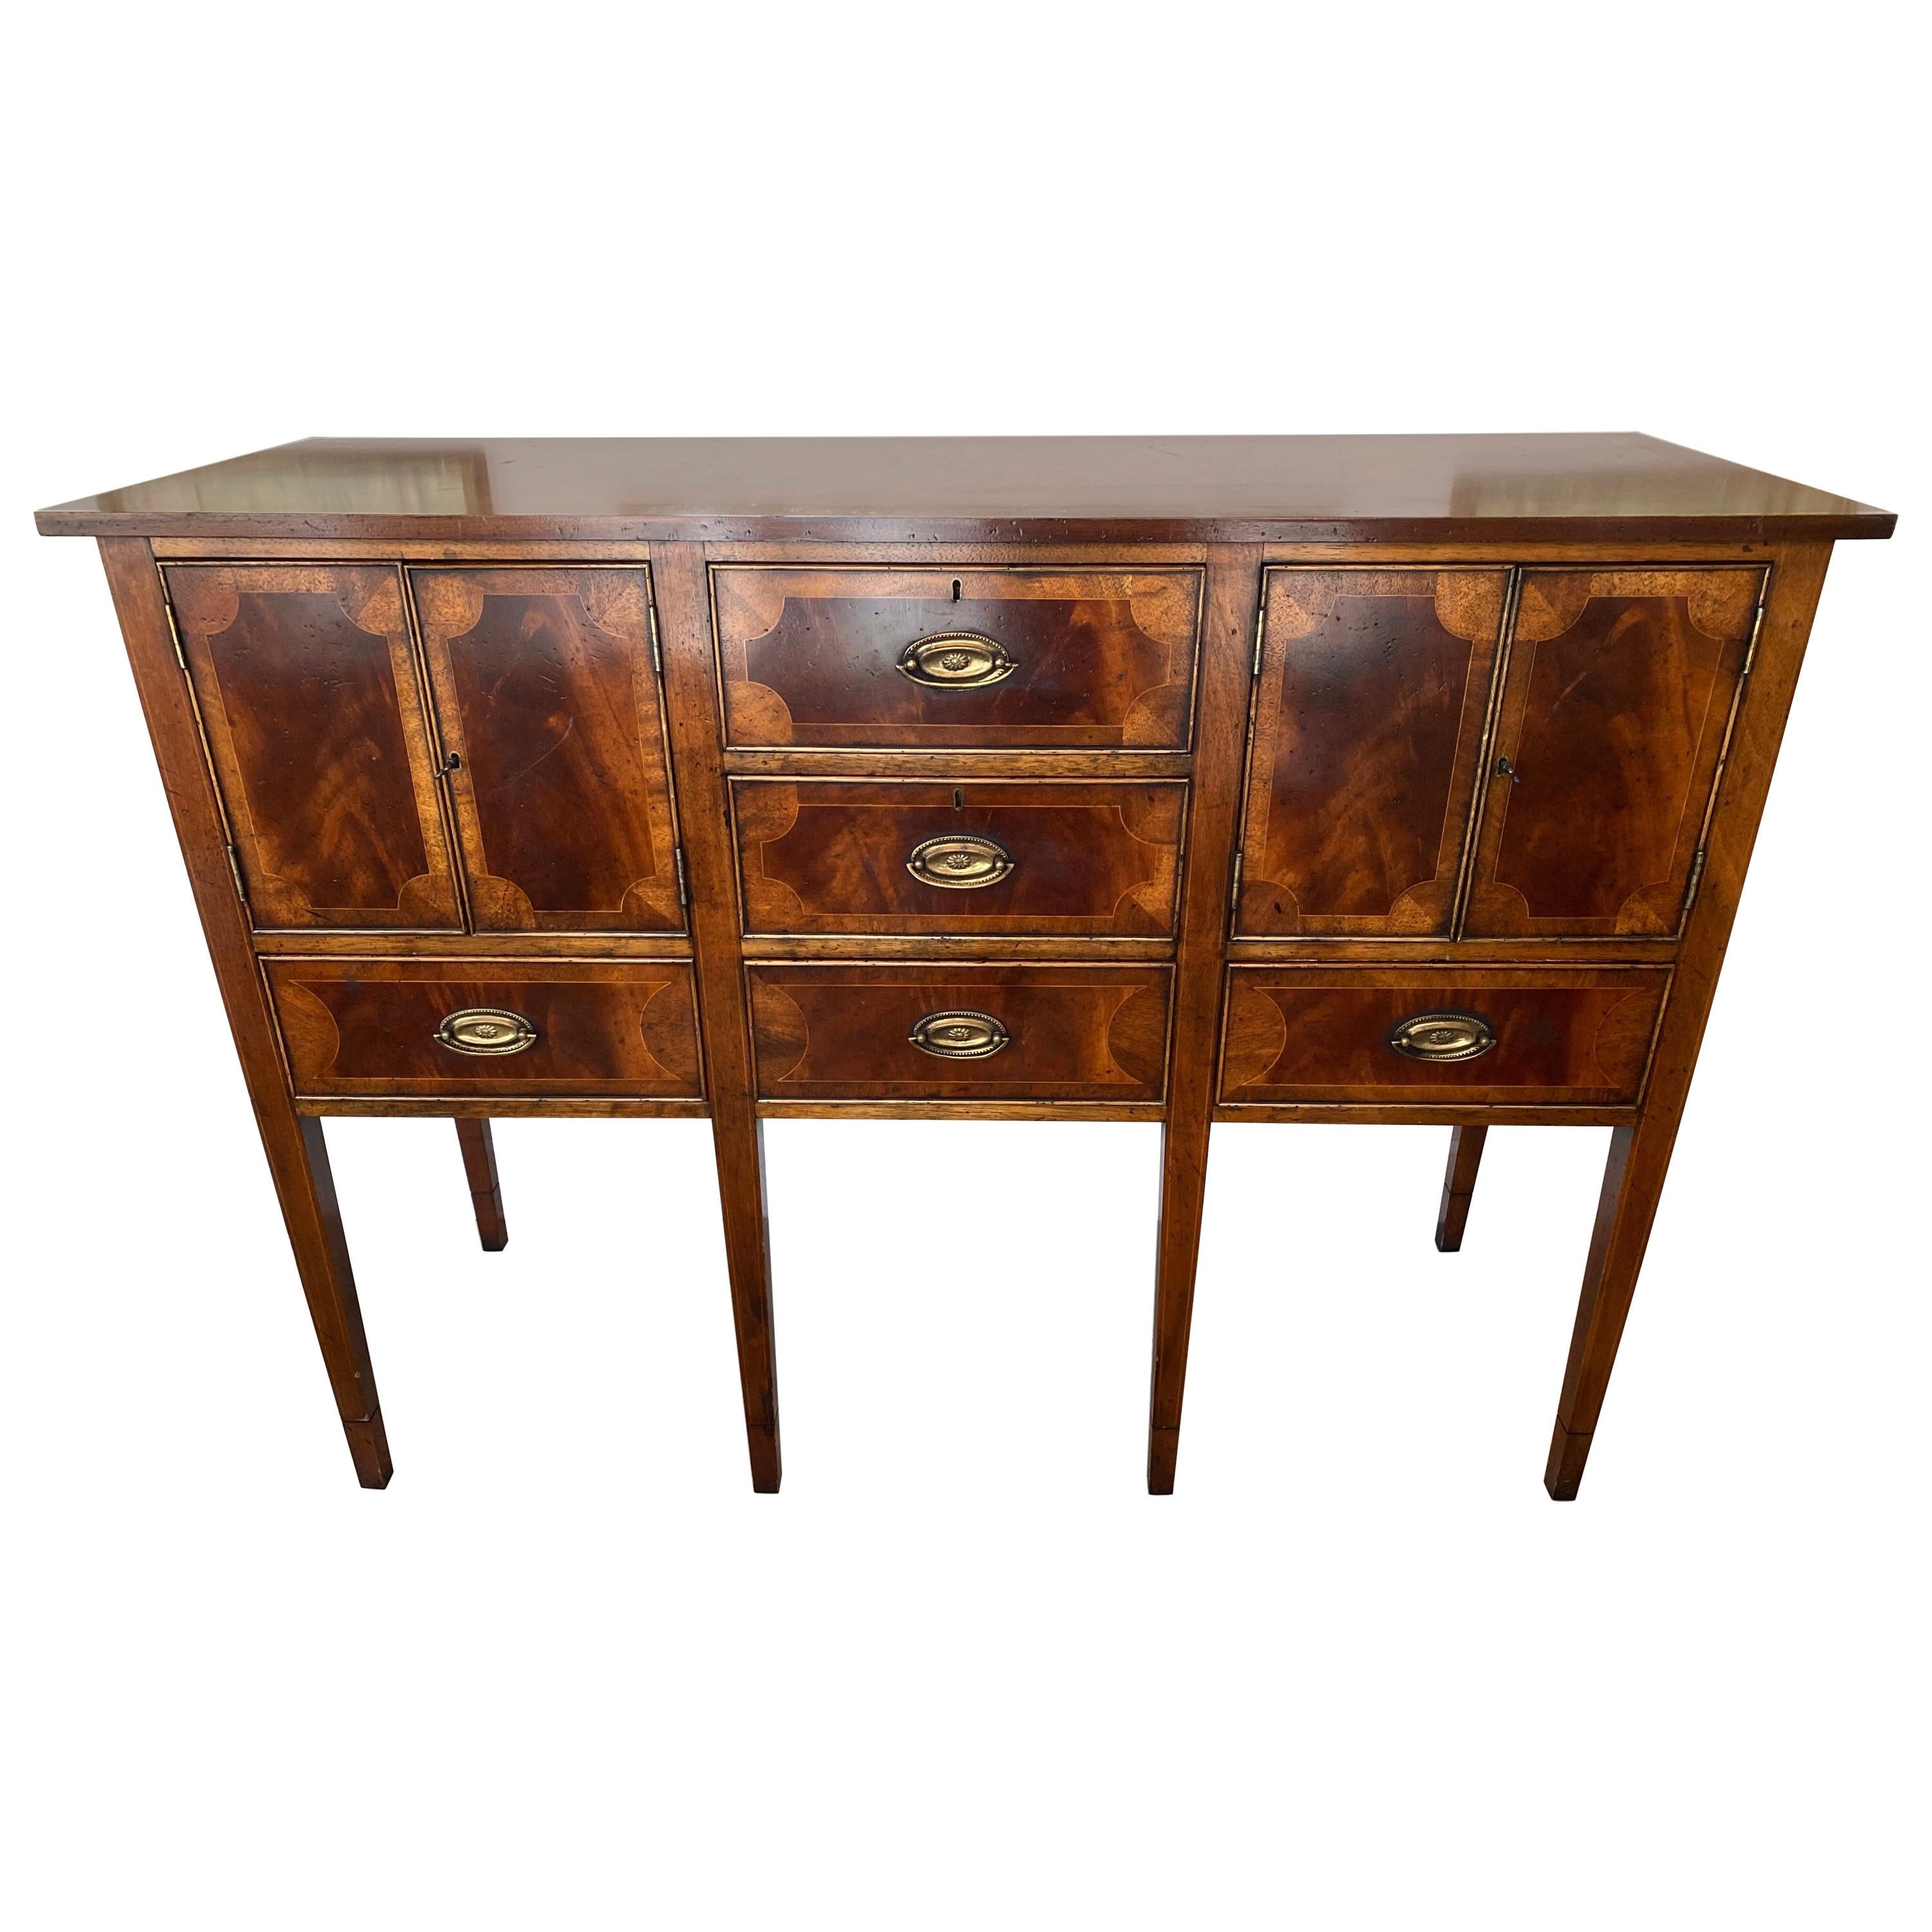 Vintage Inlaid English Sideboard For Sale